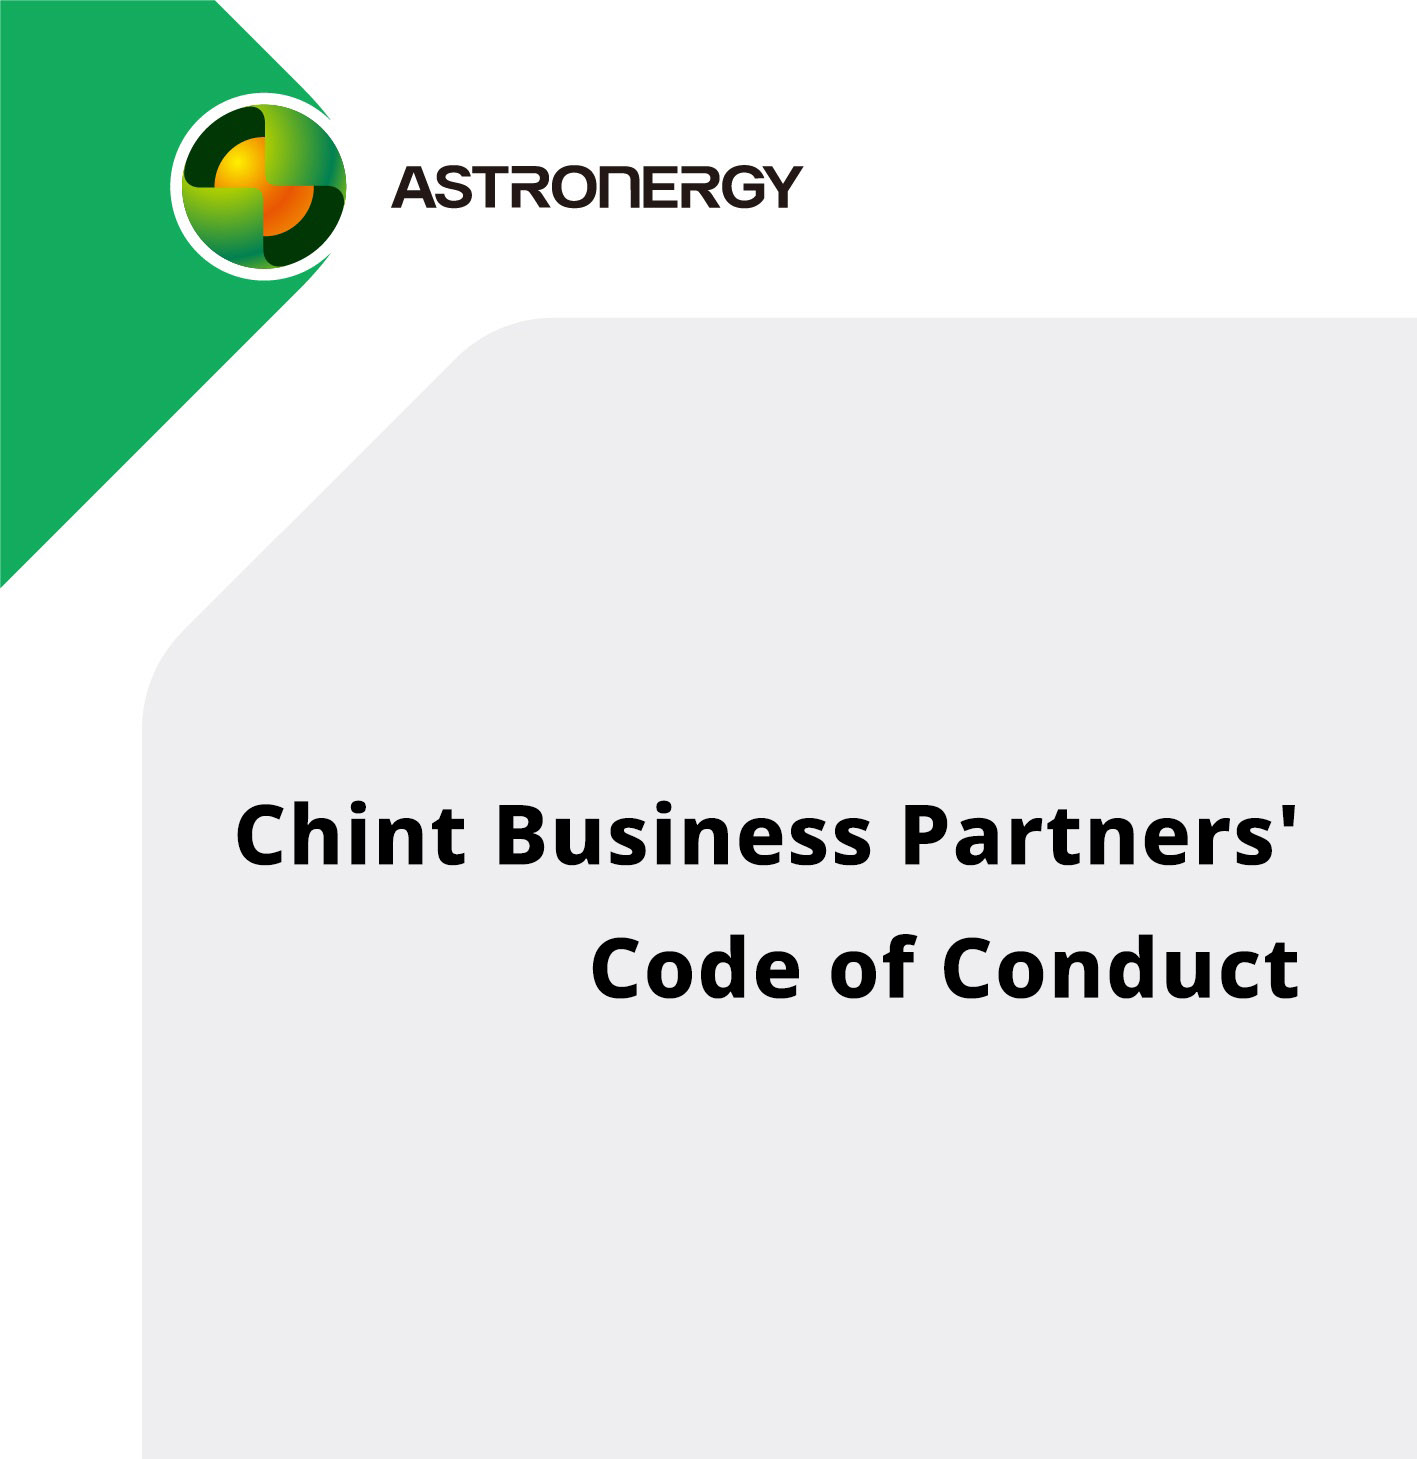 Astronergy Business Partners’ Code of Conduct